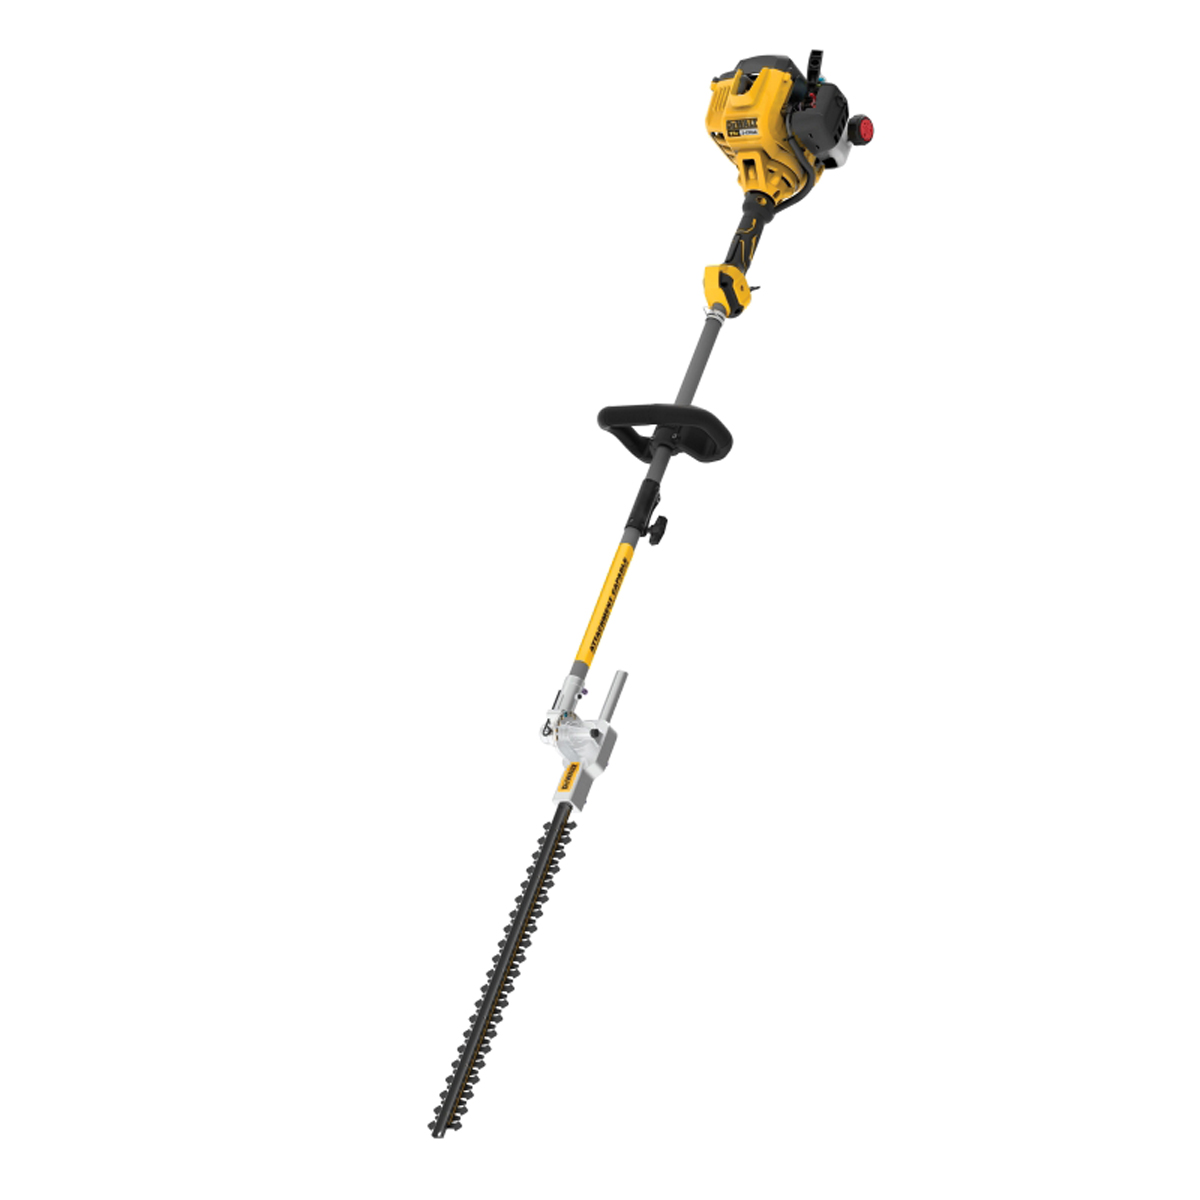 41AD27HT539 Trimmer and Pole Hedger, Gas, 27 cc Engine Displacement, 2-Cycle Engine, 1 in Cutting Capacity